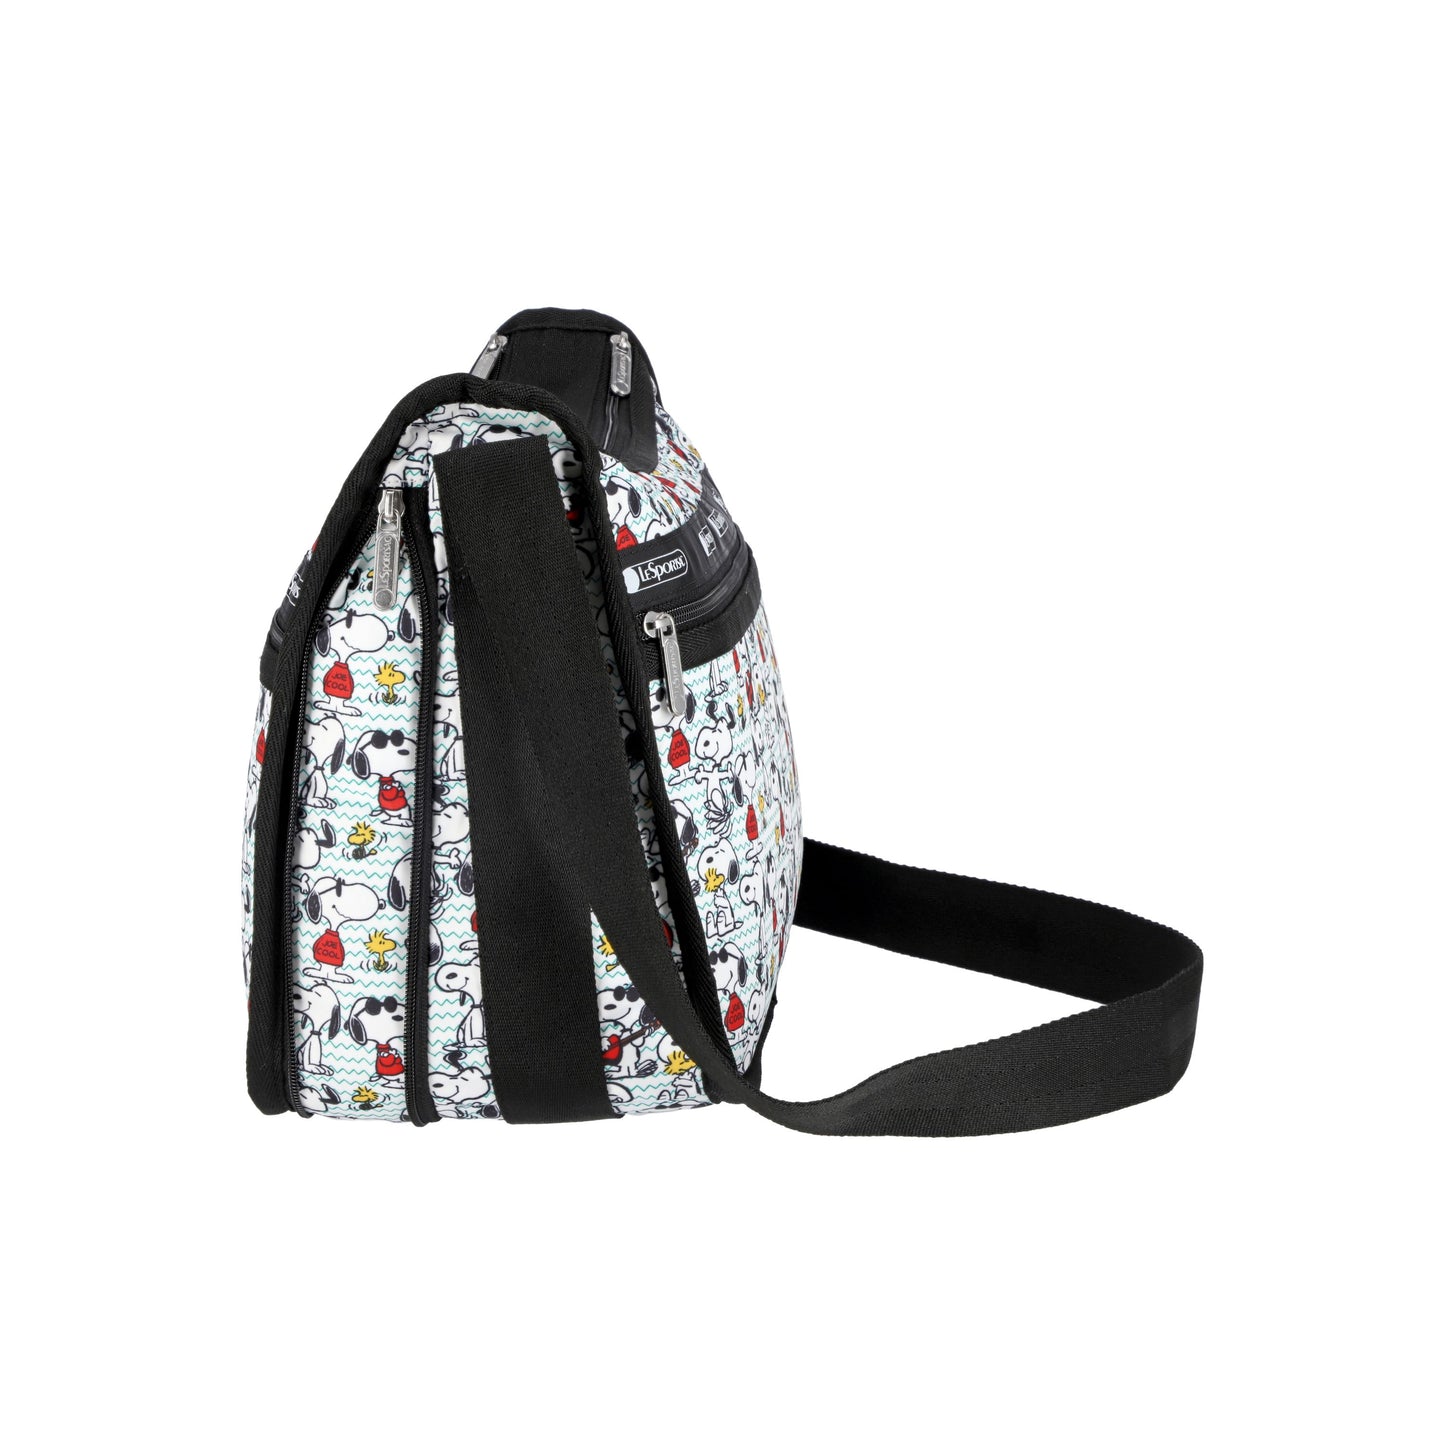 Snoopy and Woodstock Deluxe Everyday Bag